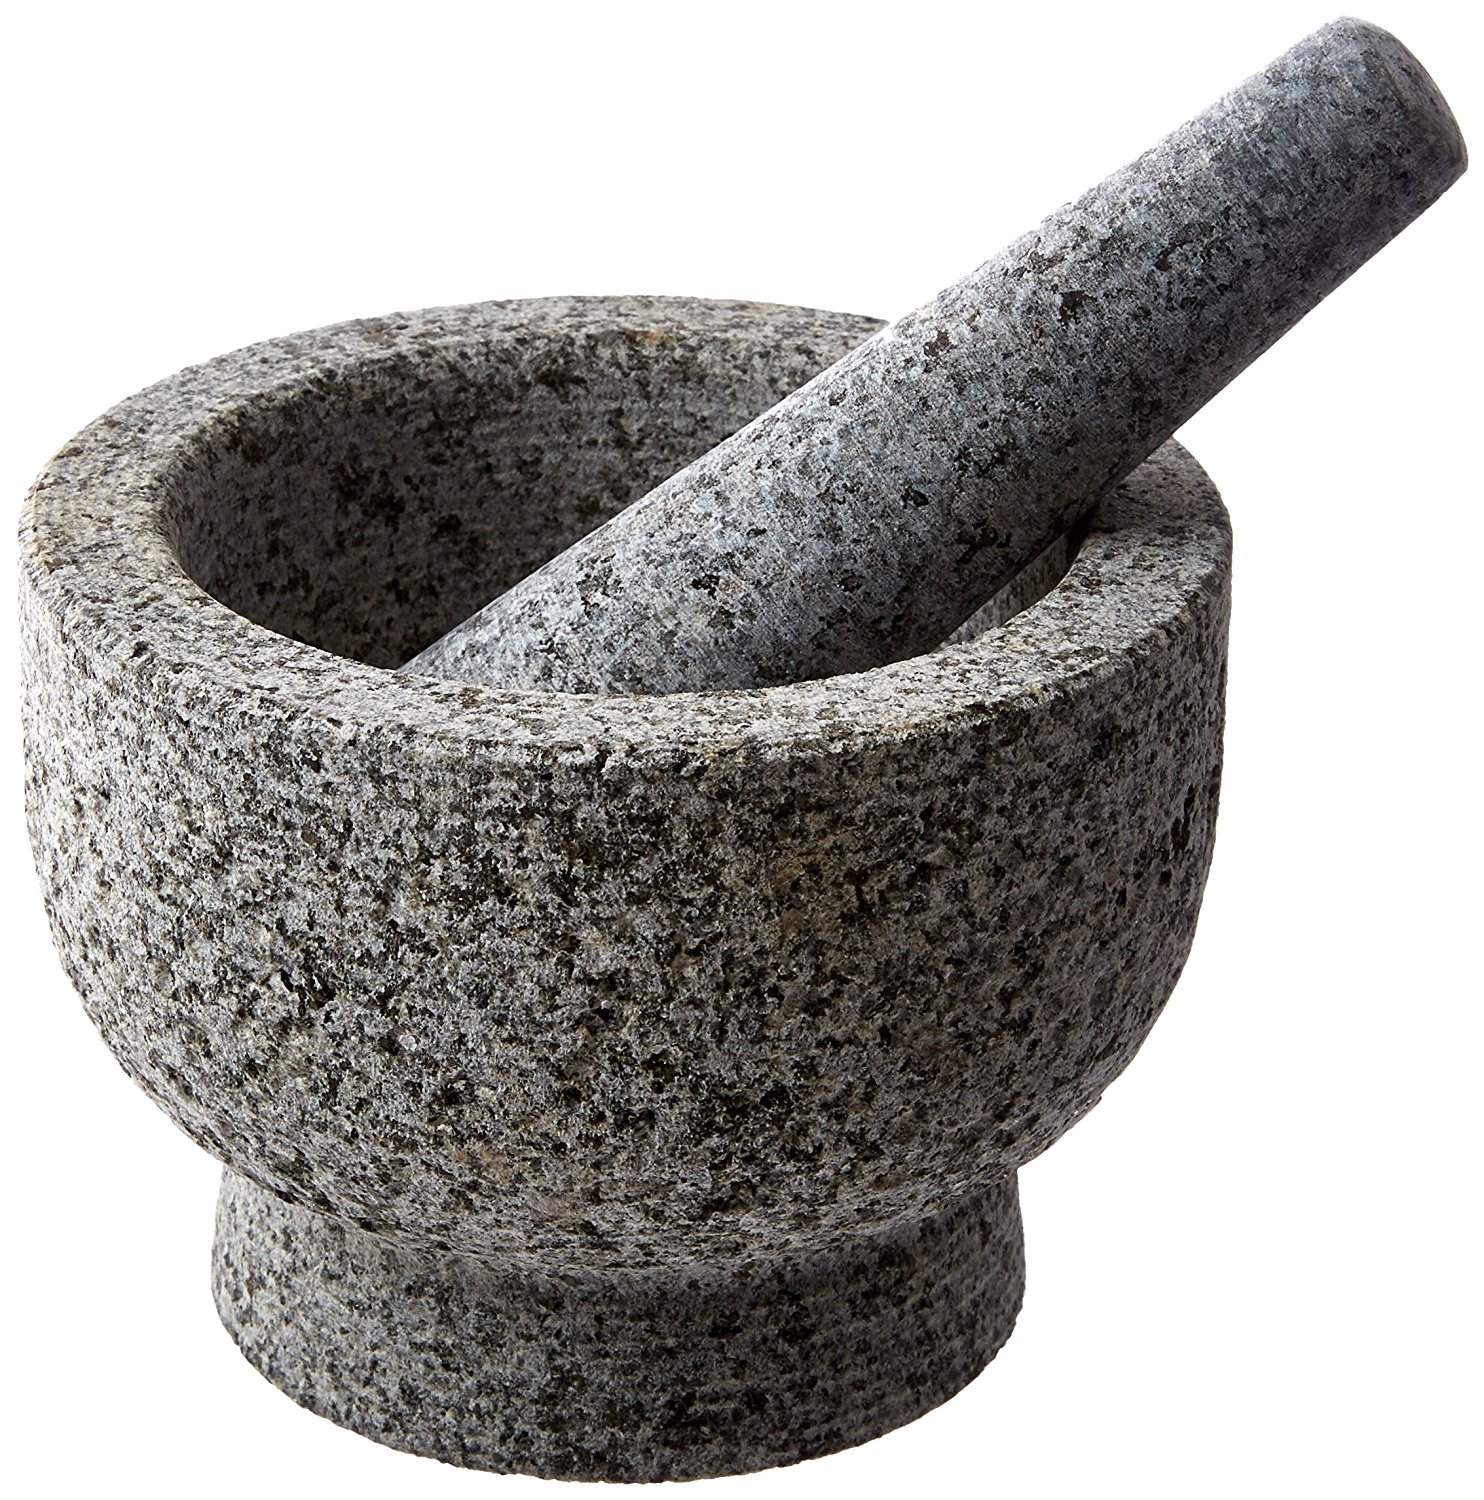 Mortar and pestle photo